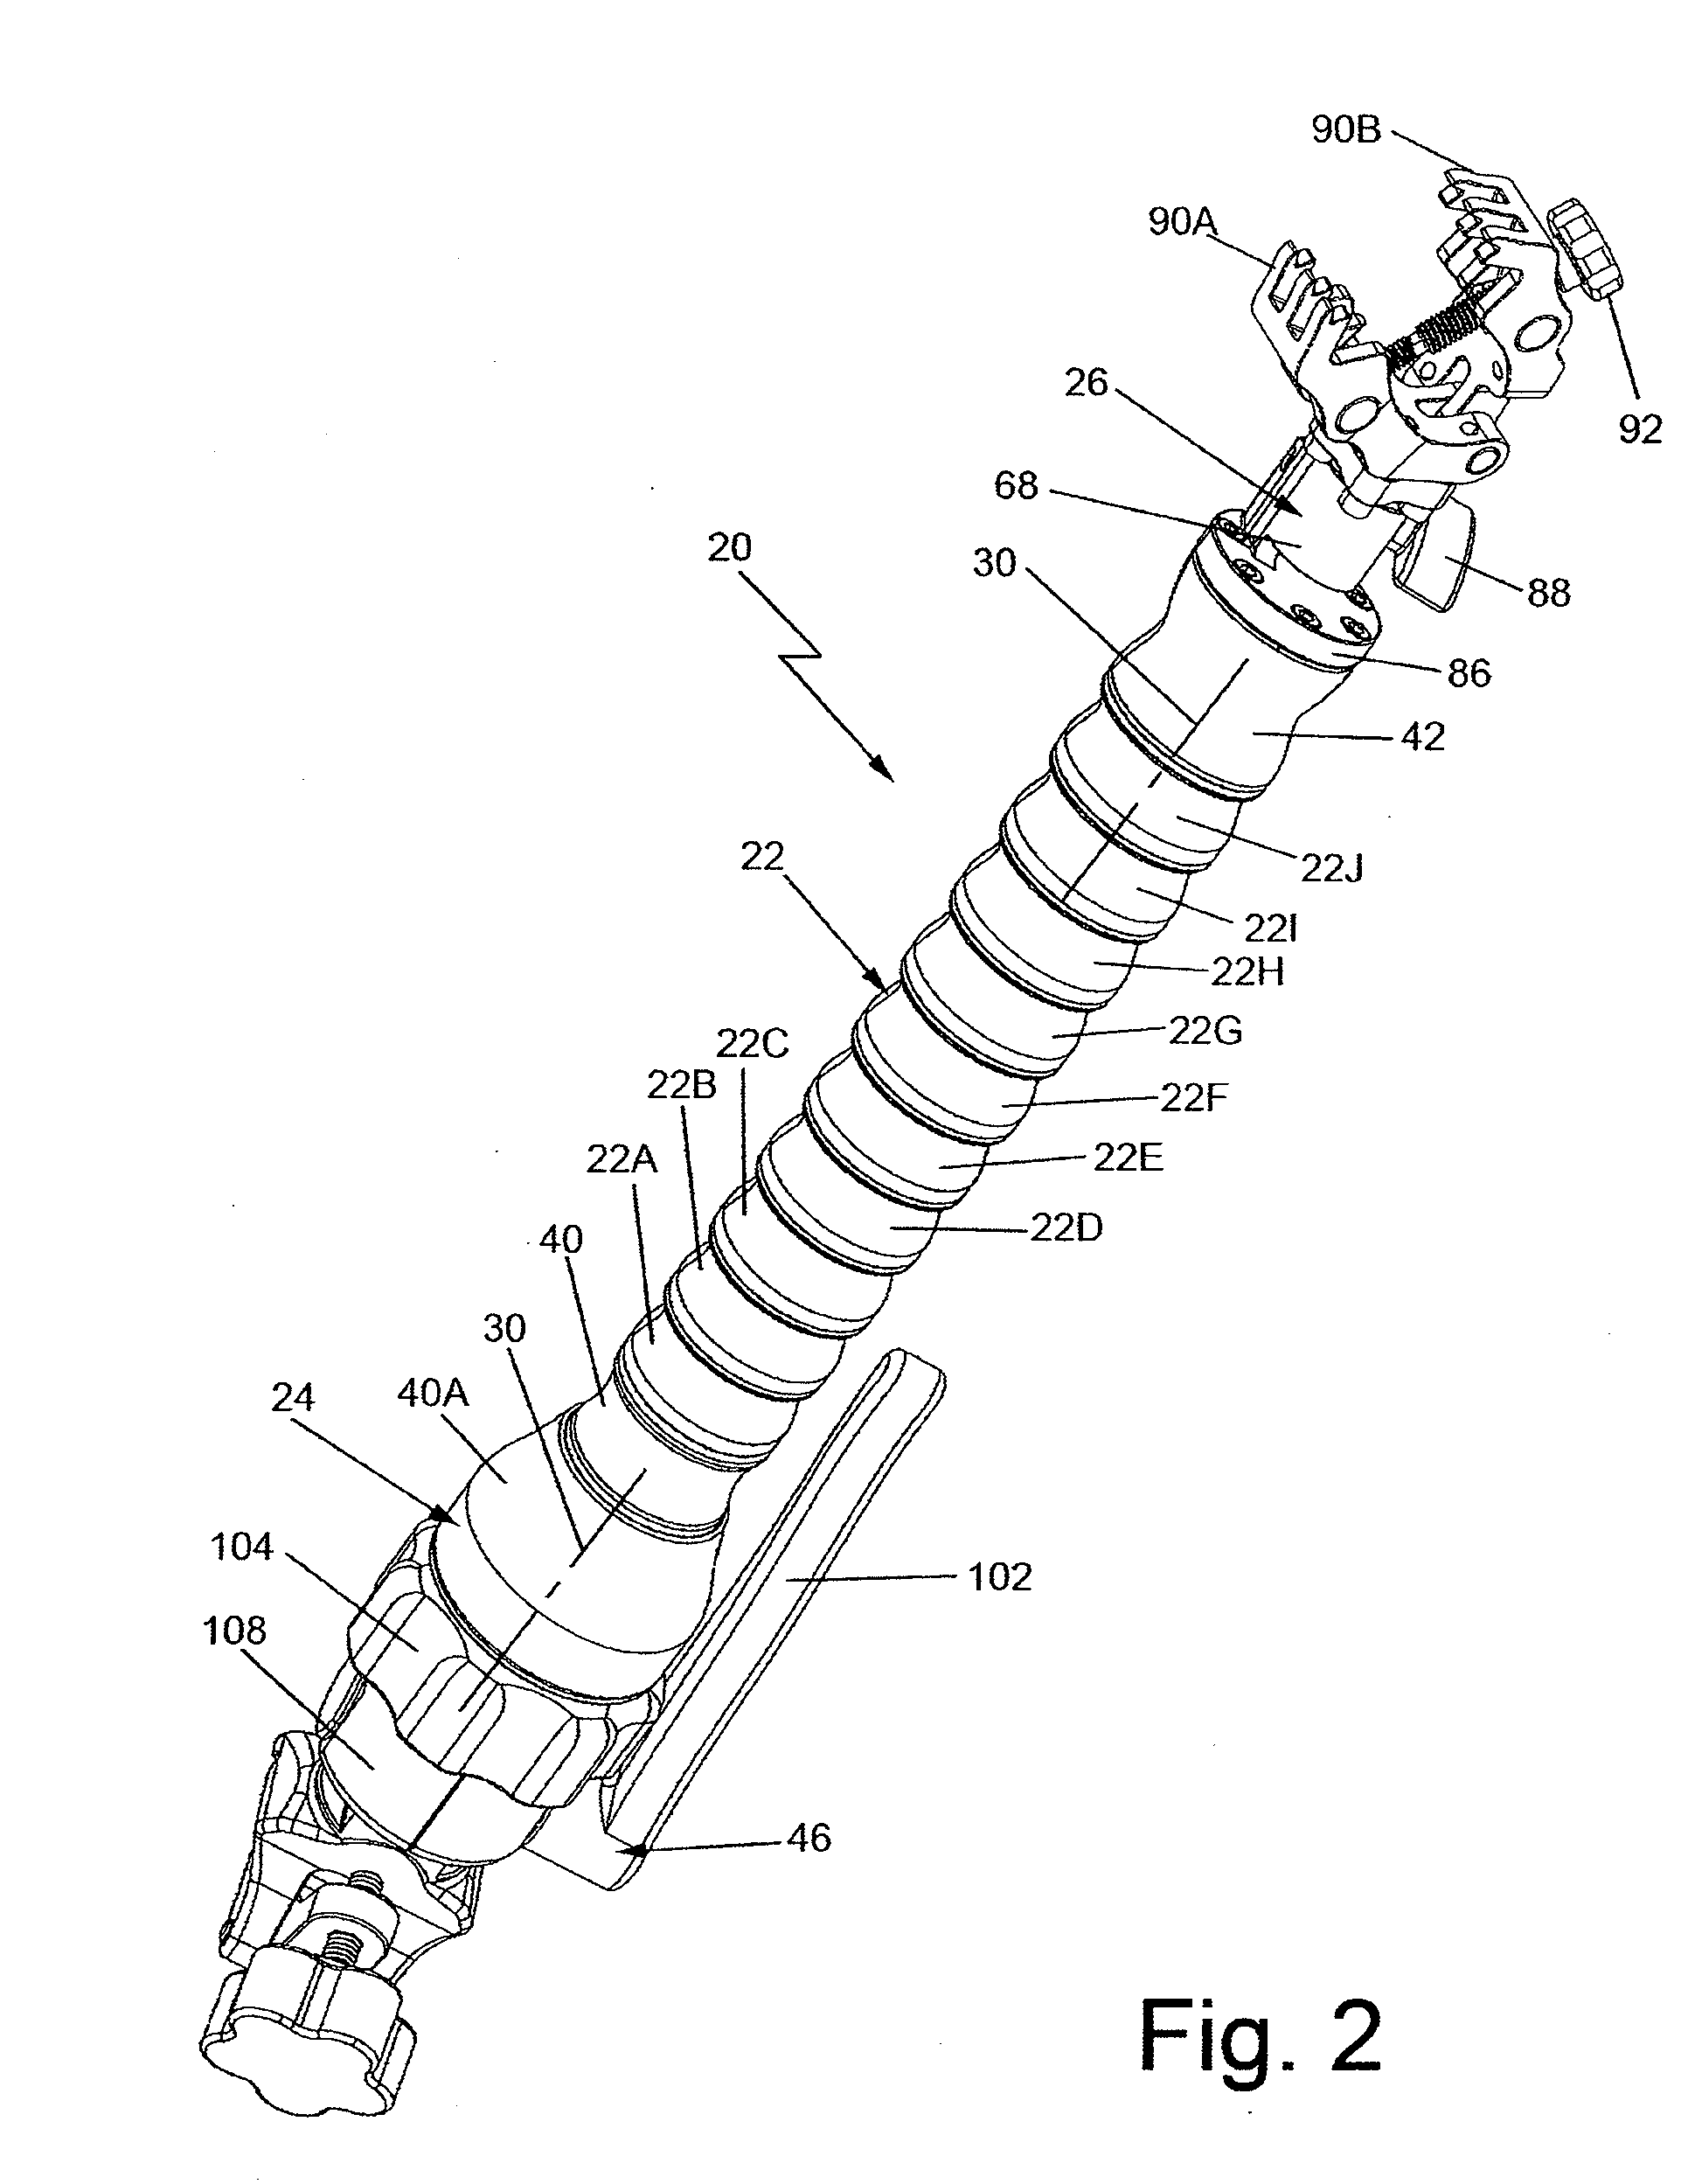 Device for precision positioning of instruments at a MRI scanner